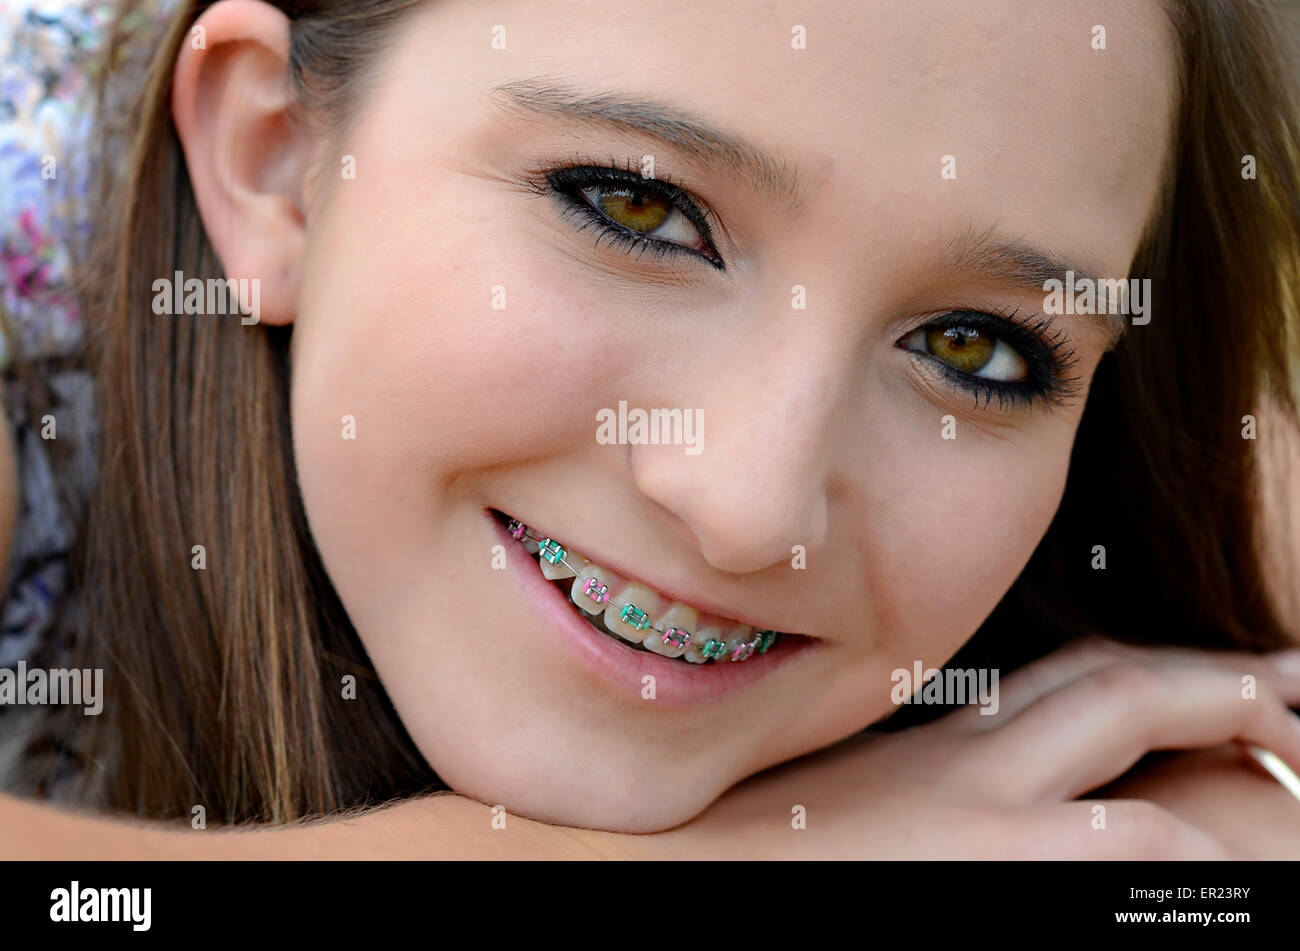 A pretty young teenager closeup with braces on her teeth. Stock Photo